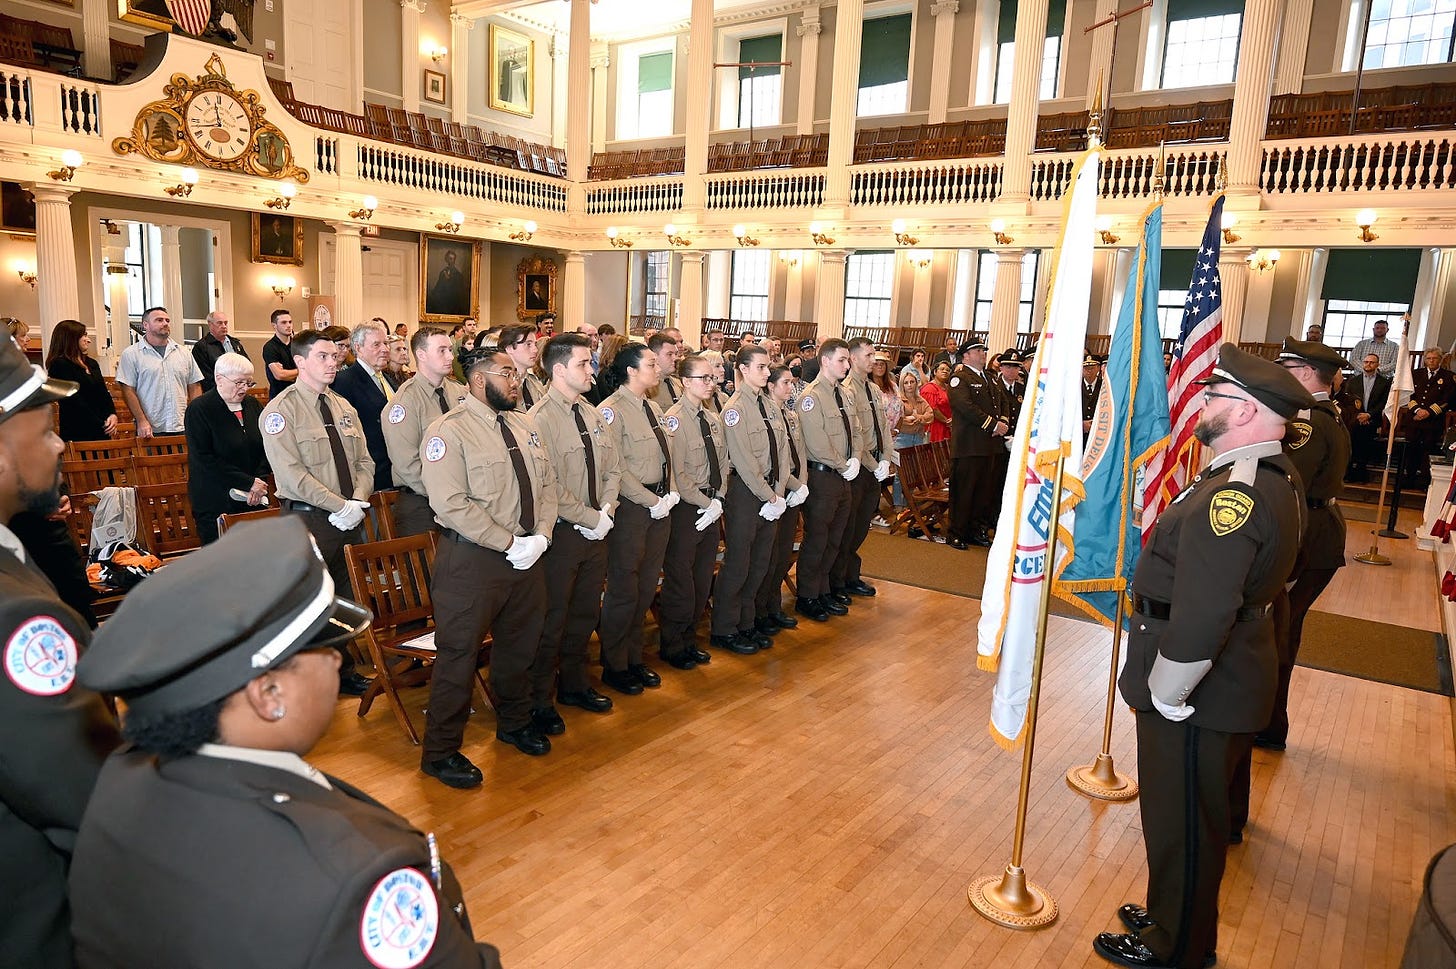 The incoming recruits stand at attention before the graduation ceremony begins in Faneuil Hall